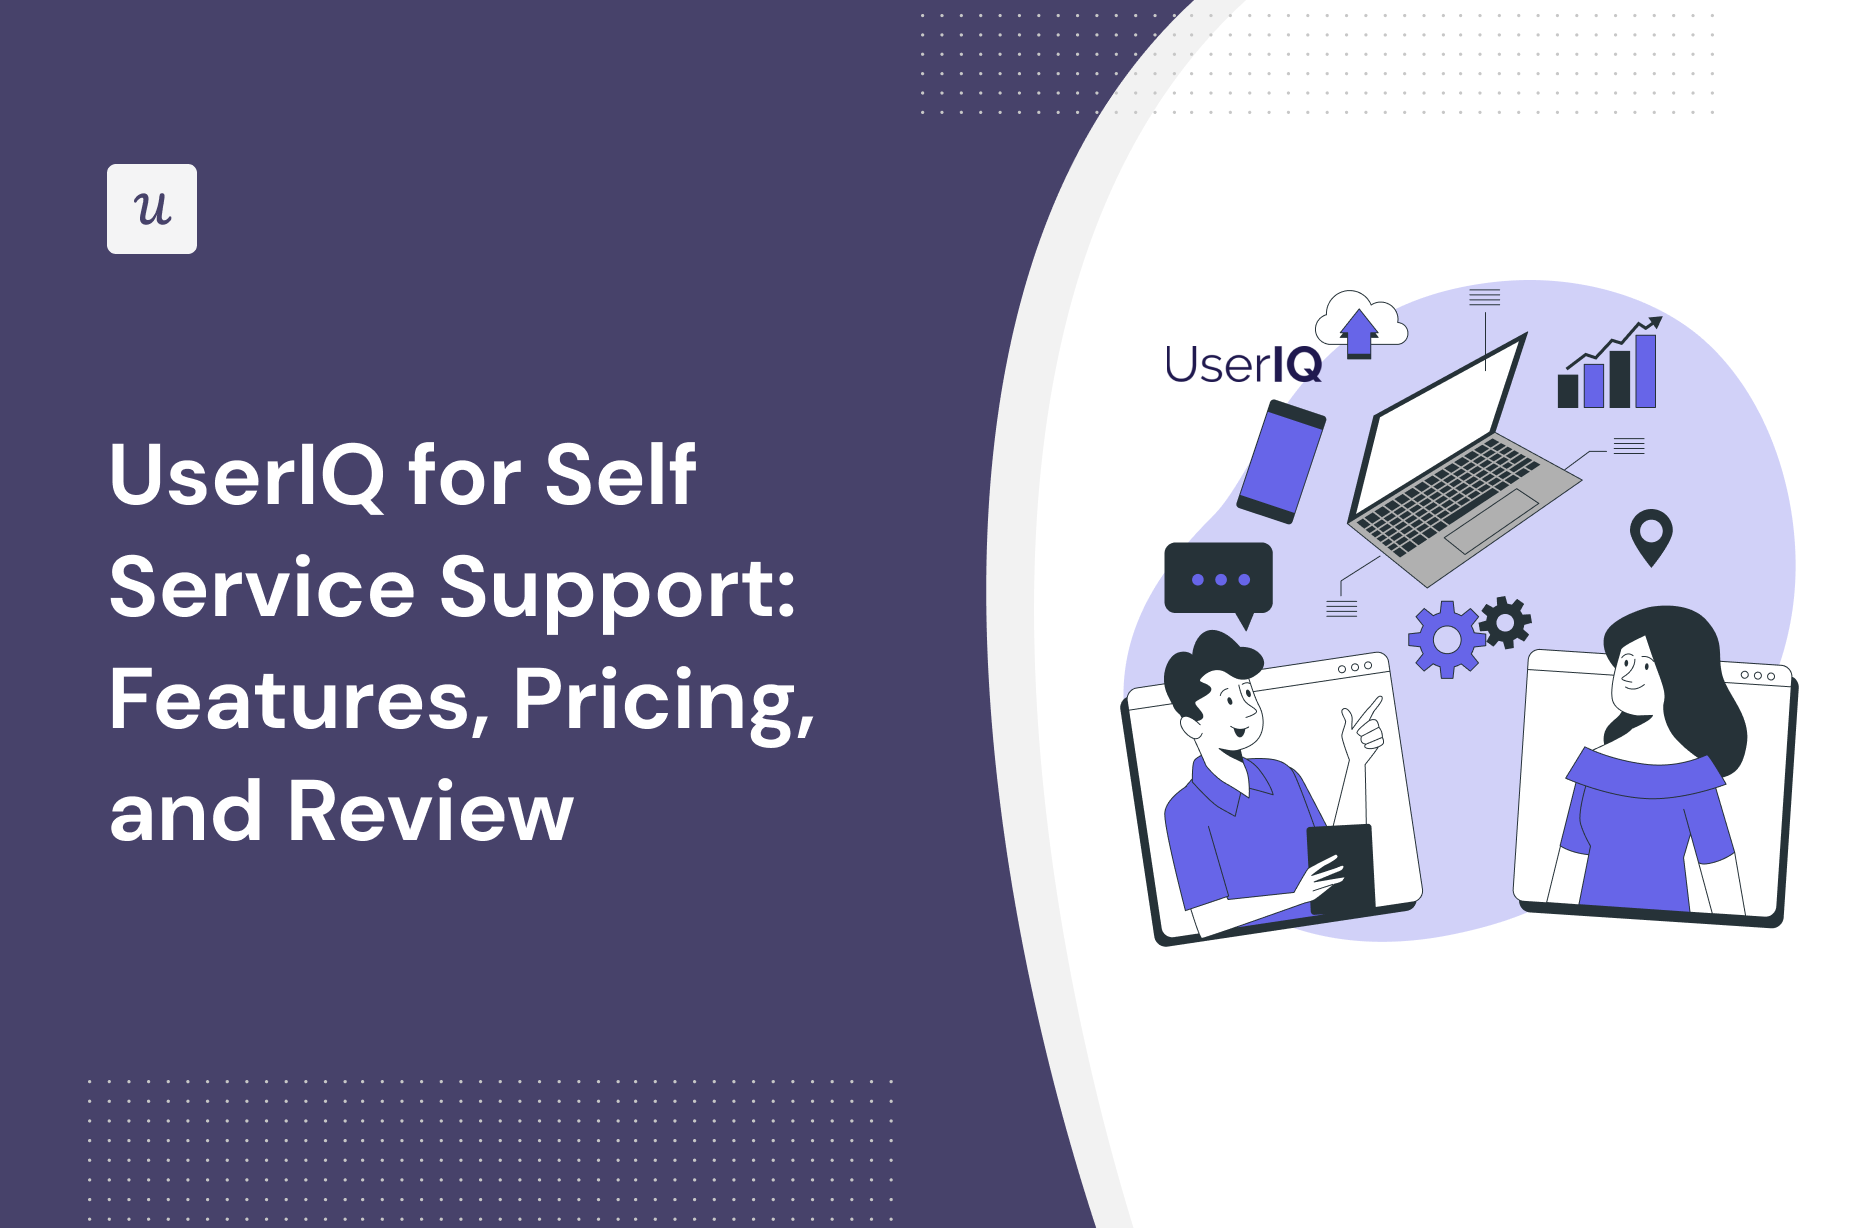 UserIQ for Self Service Support: Features, Pricing, and Review